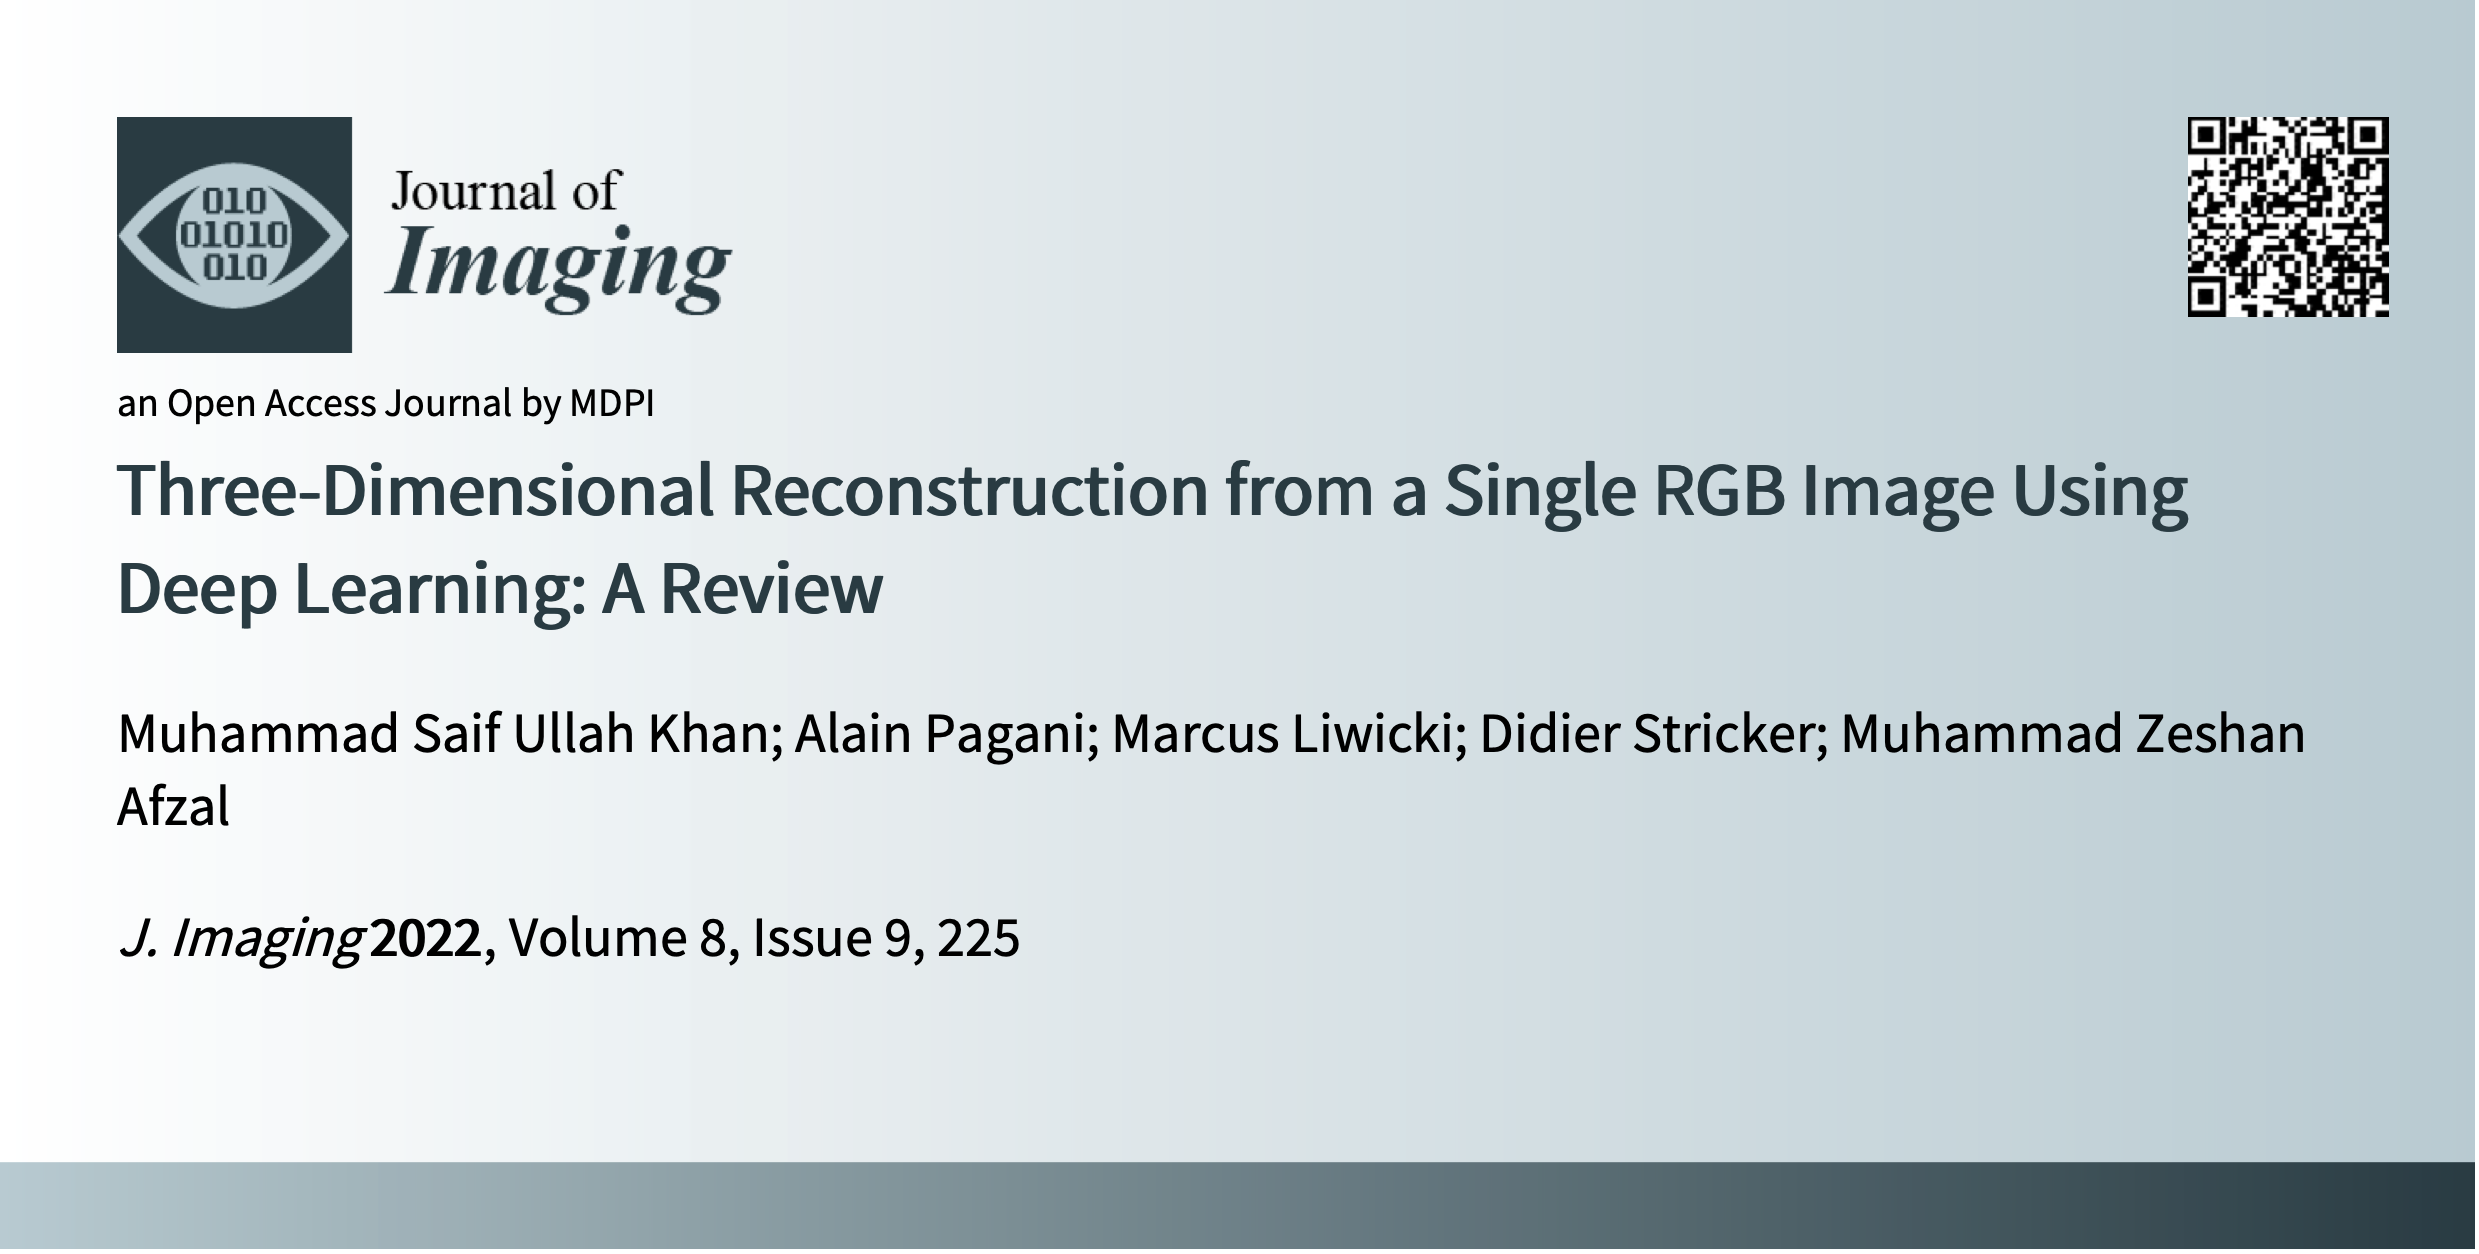 Three-Dimensional Reconstruction from a Single RGB Image using Deep Learning: A Review